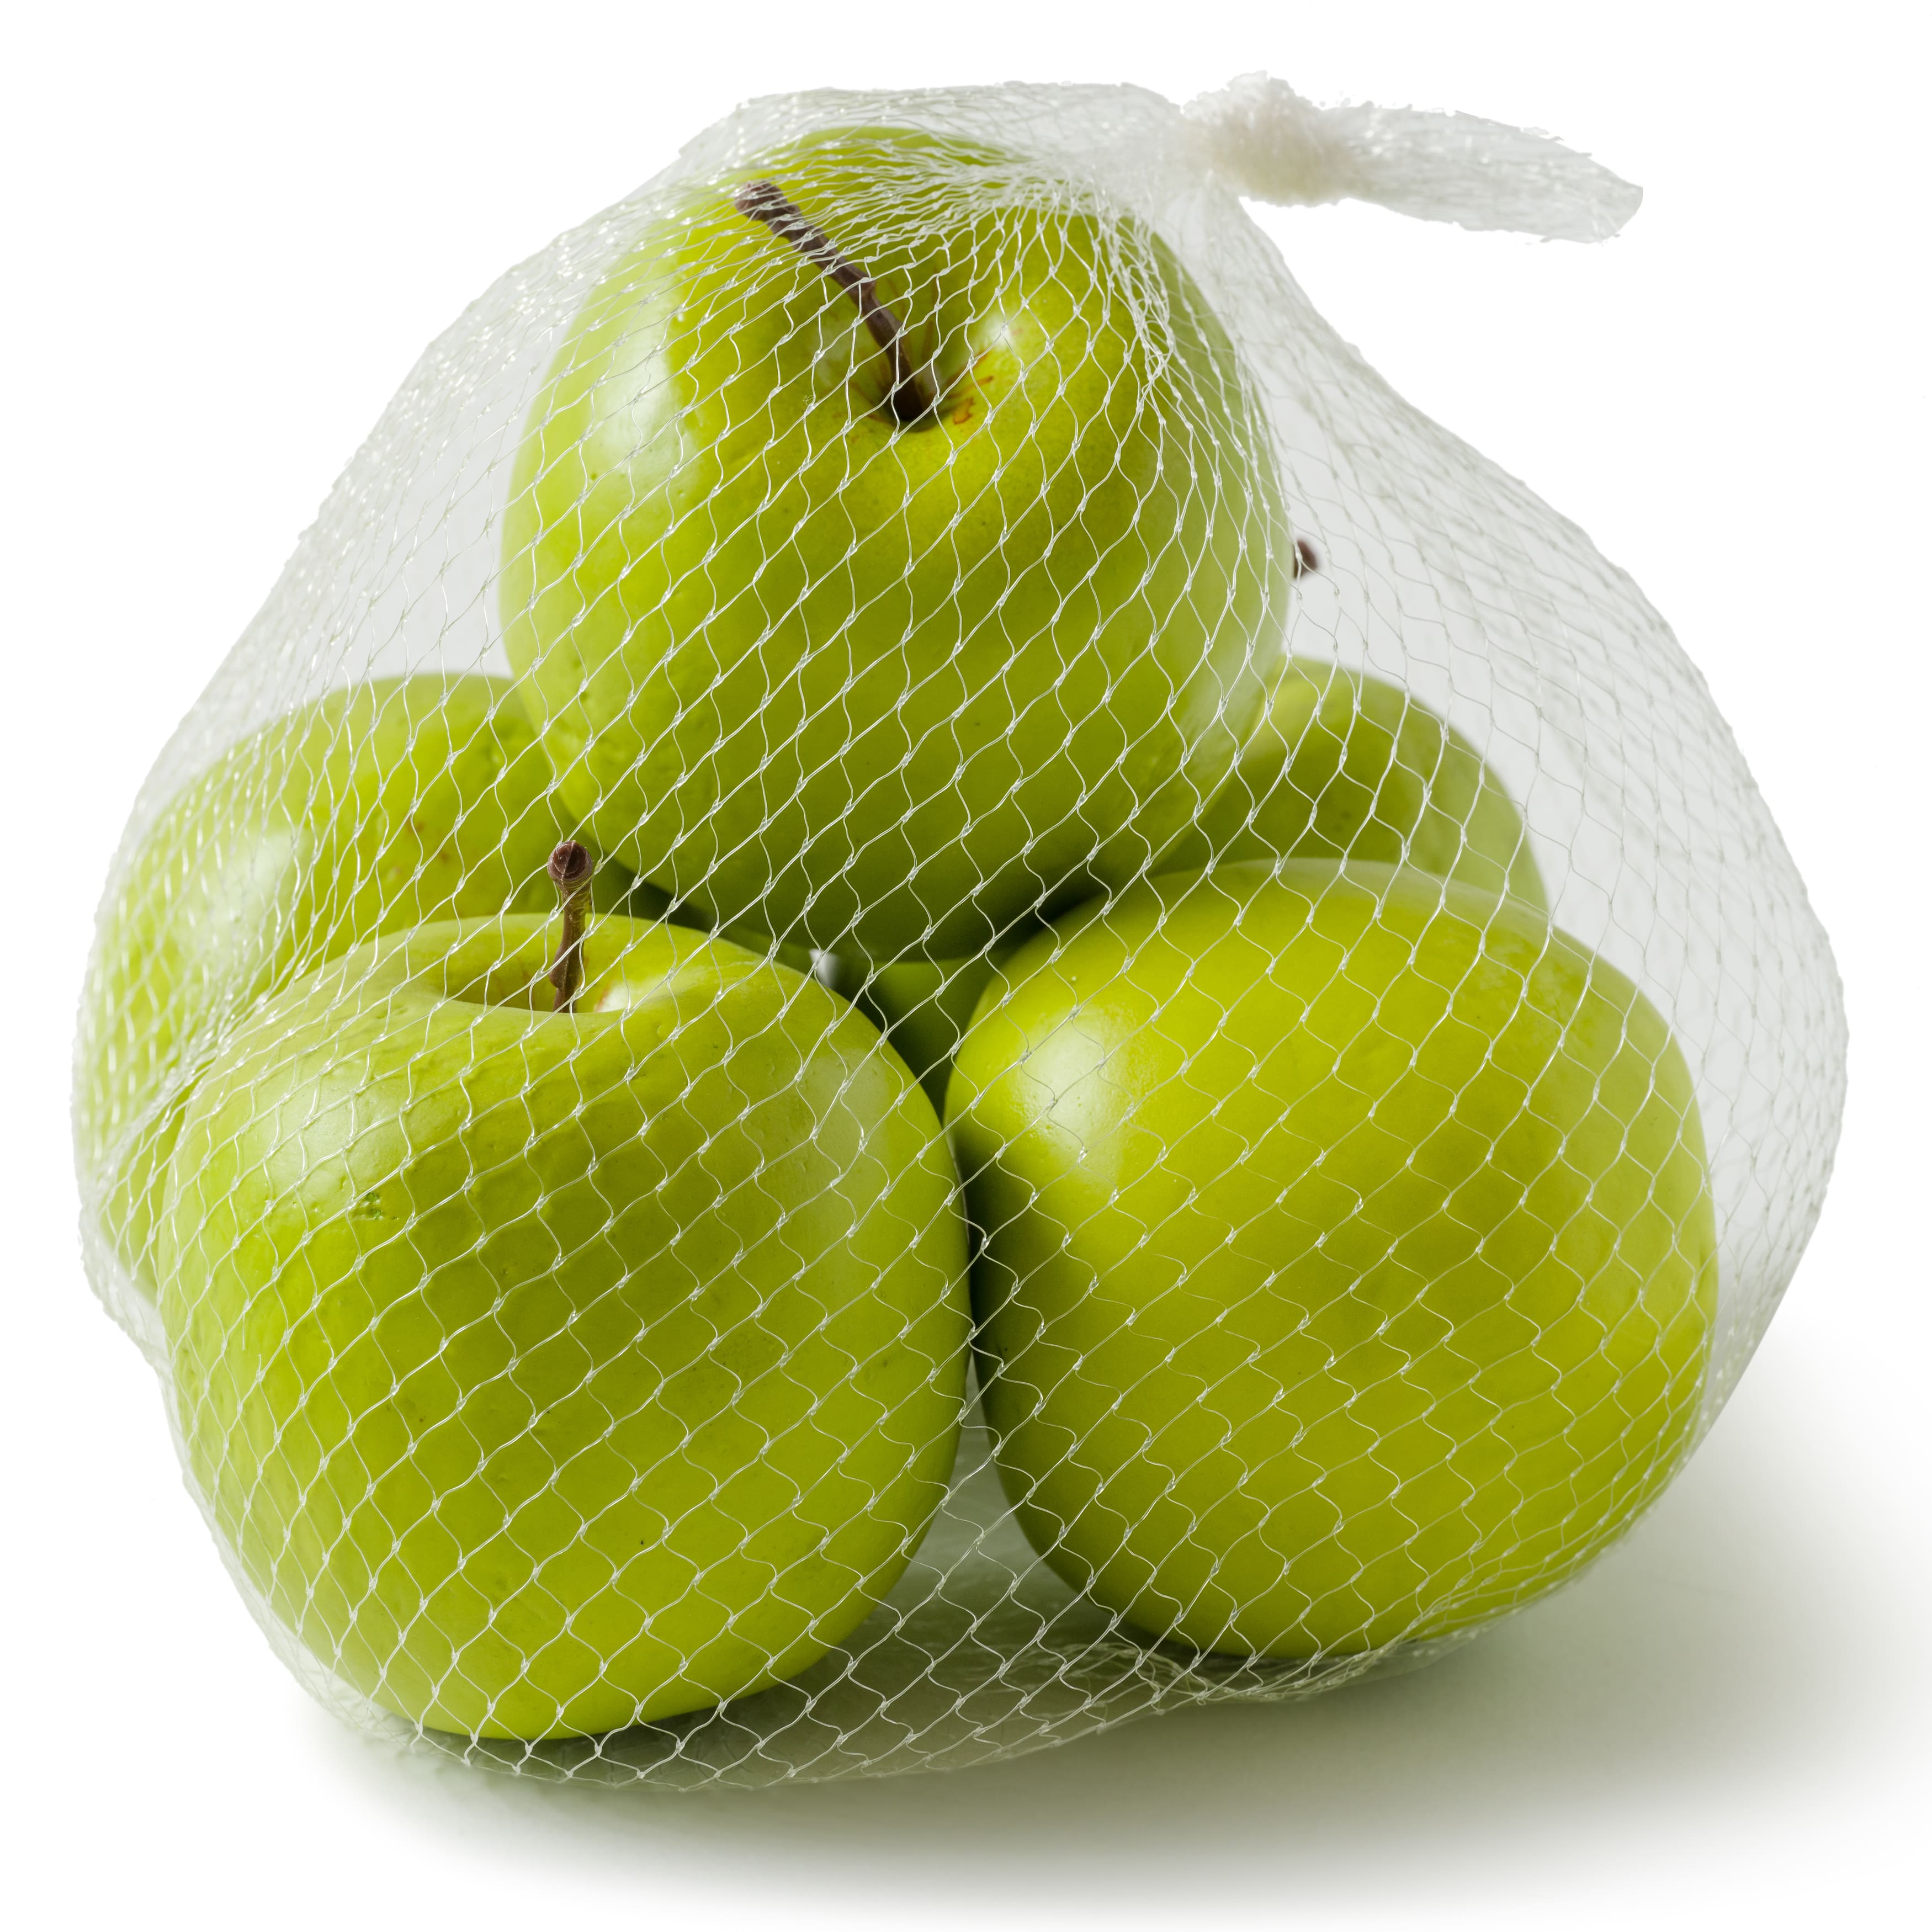 Wholesale apple baggies For All Your Storage Demands – Alibaba.com